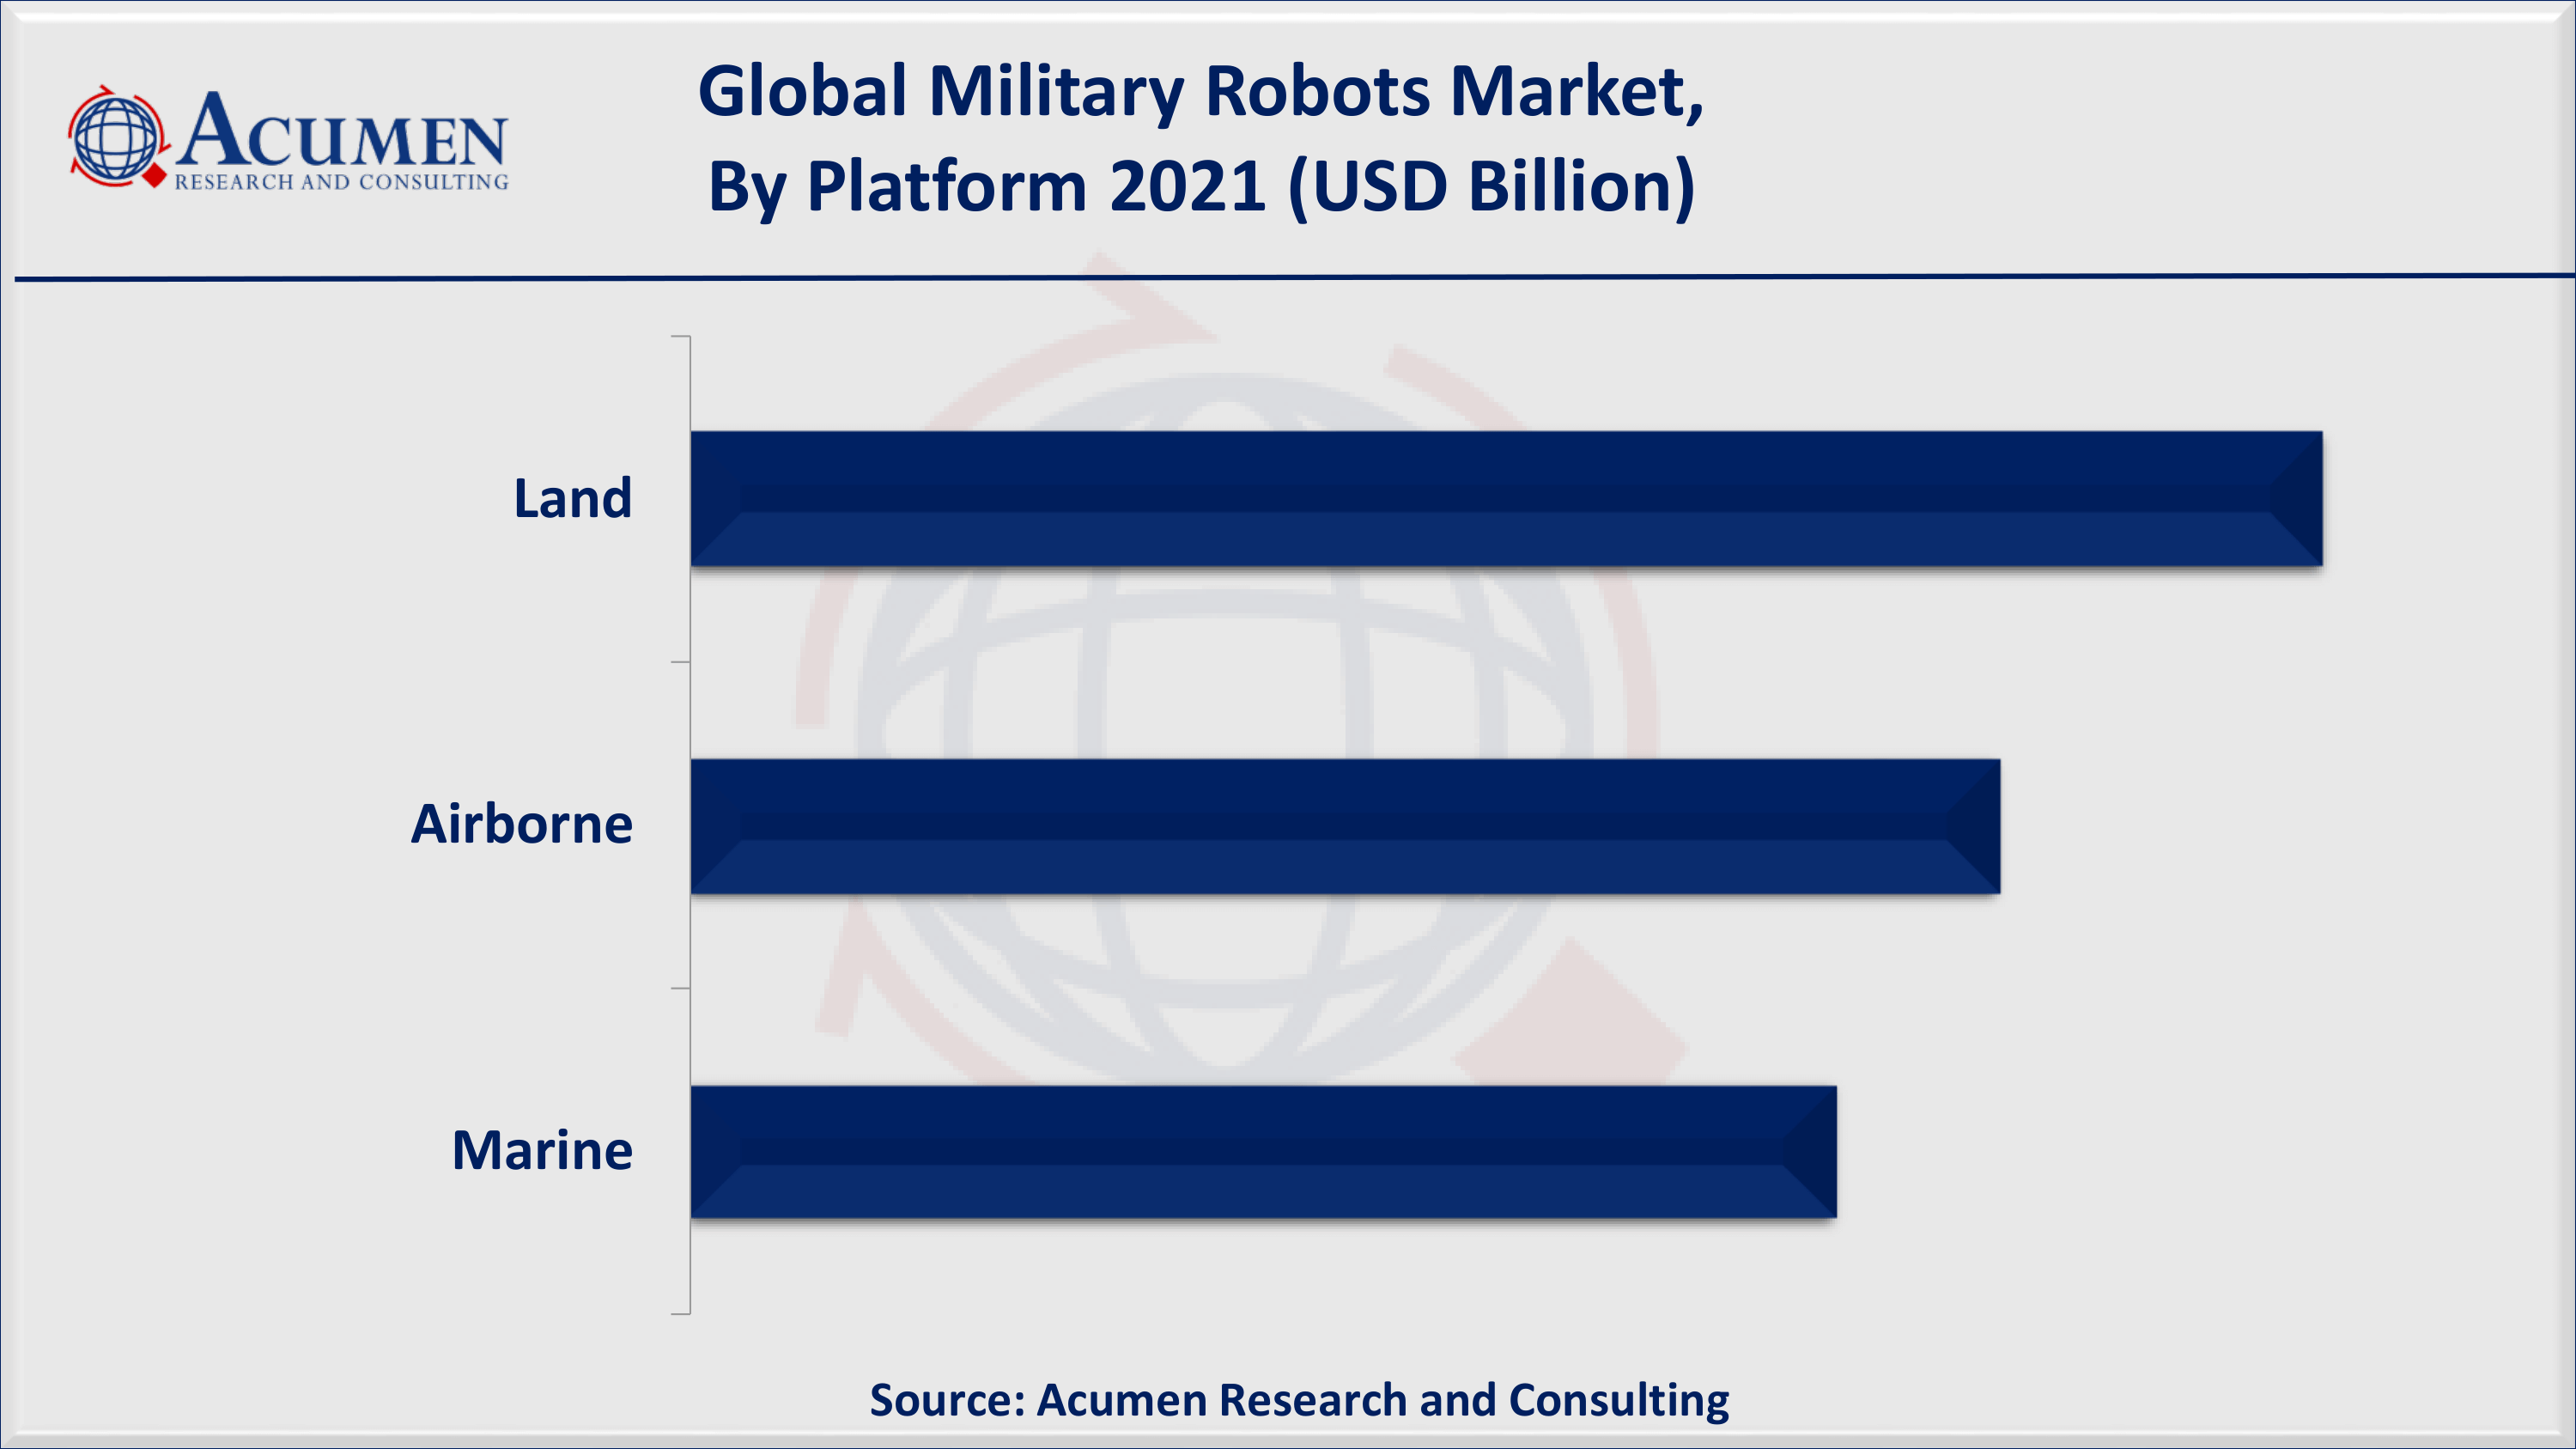 North America military robots market accounted for over 35% regional shares in 2021